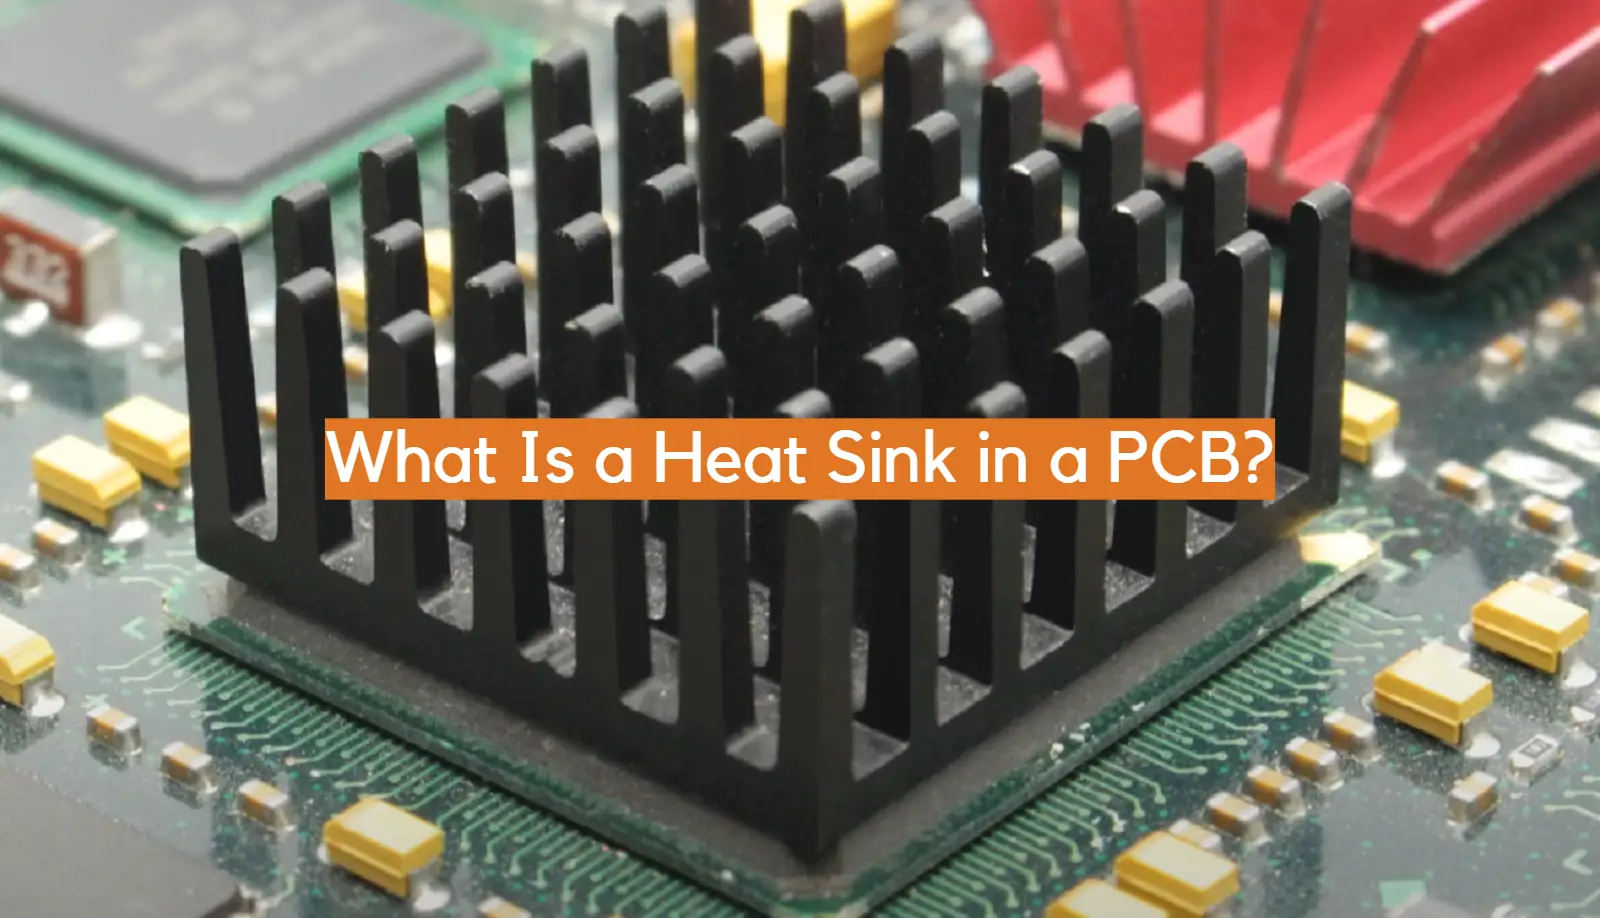 What Is a Heat Sink in a PCB?